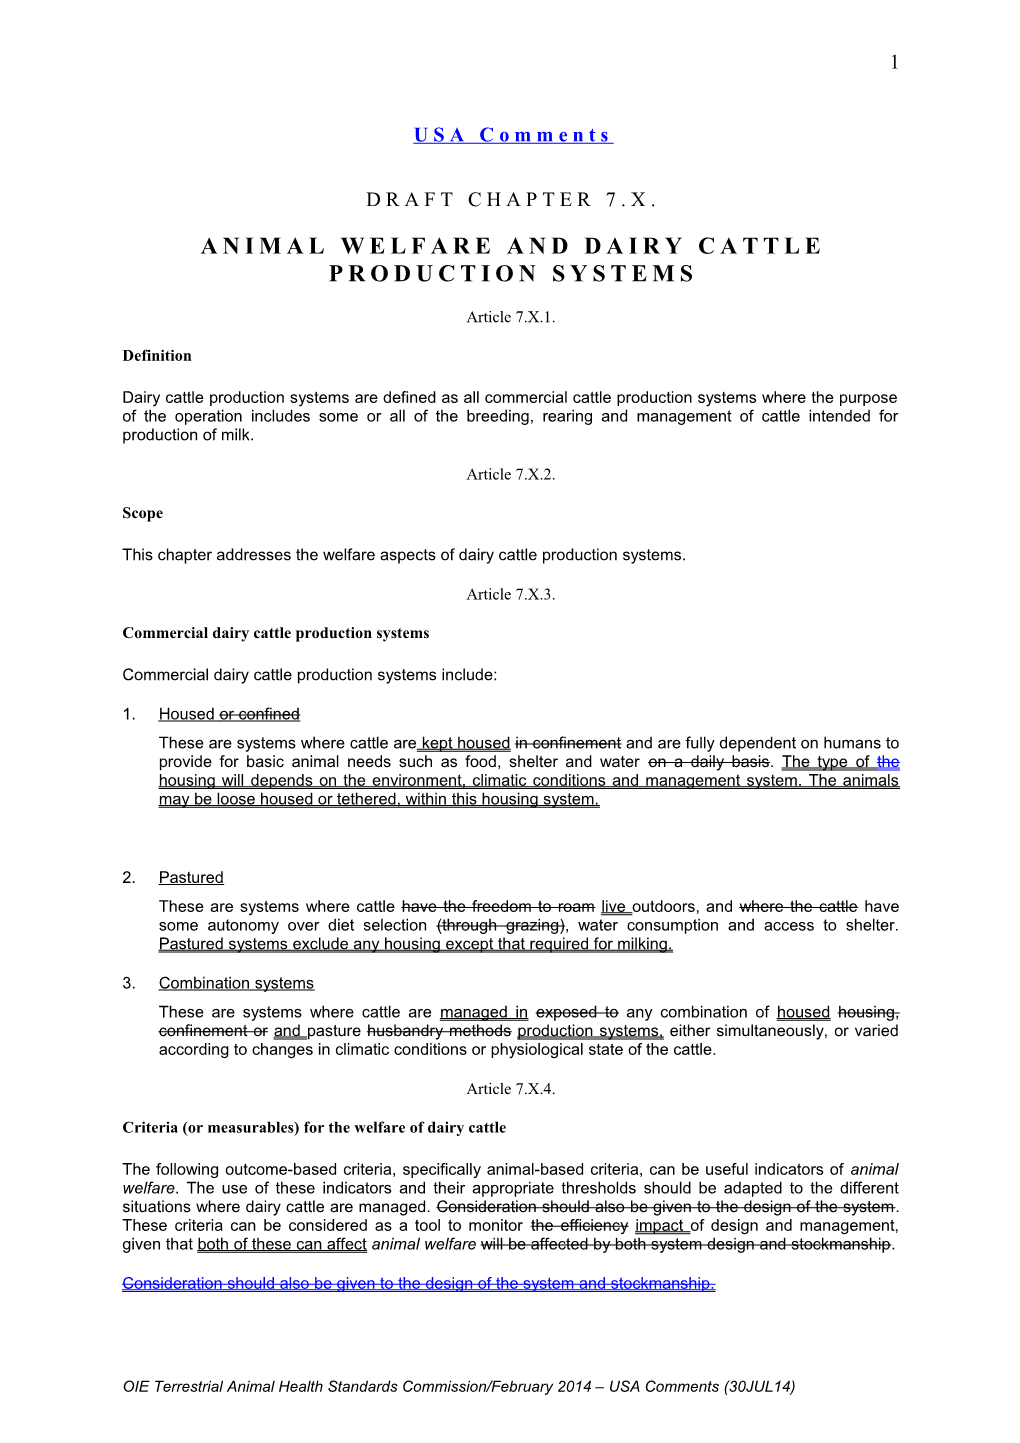 Animal Welfare and Dairy Cattle Production Systems